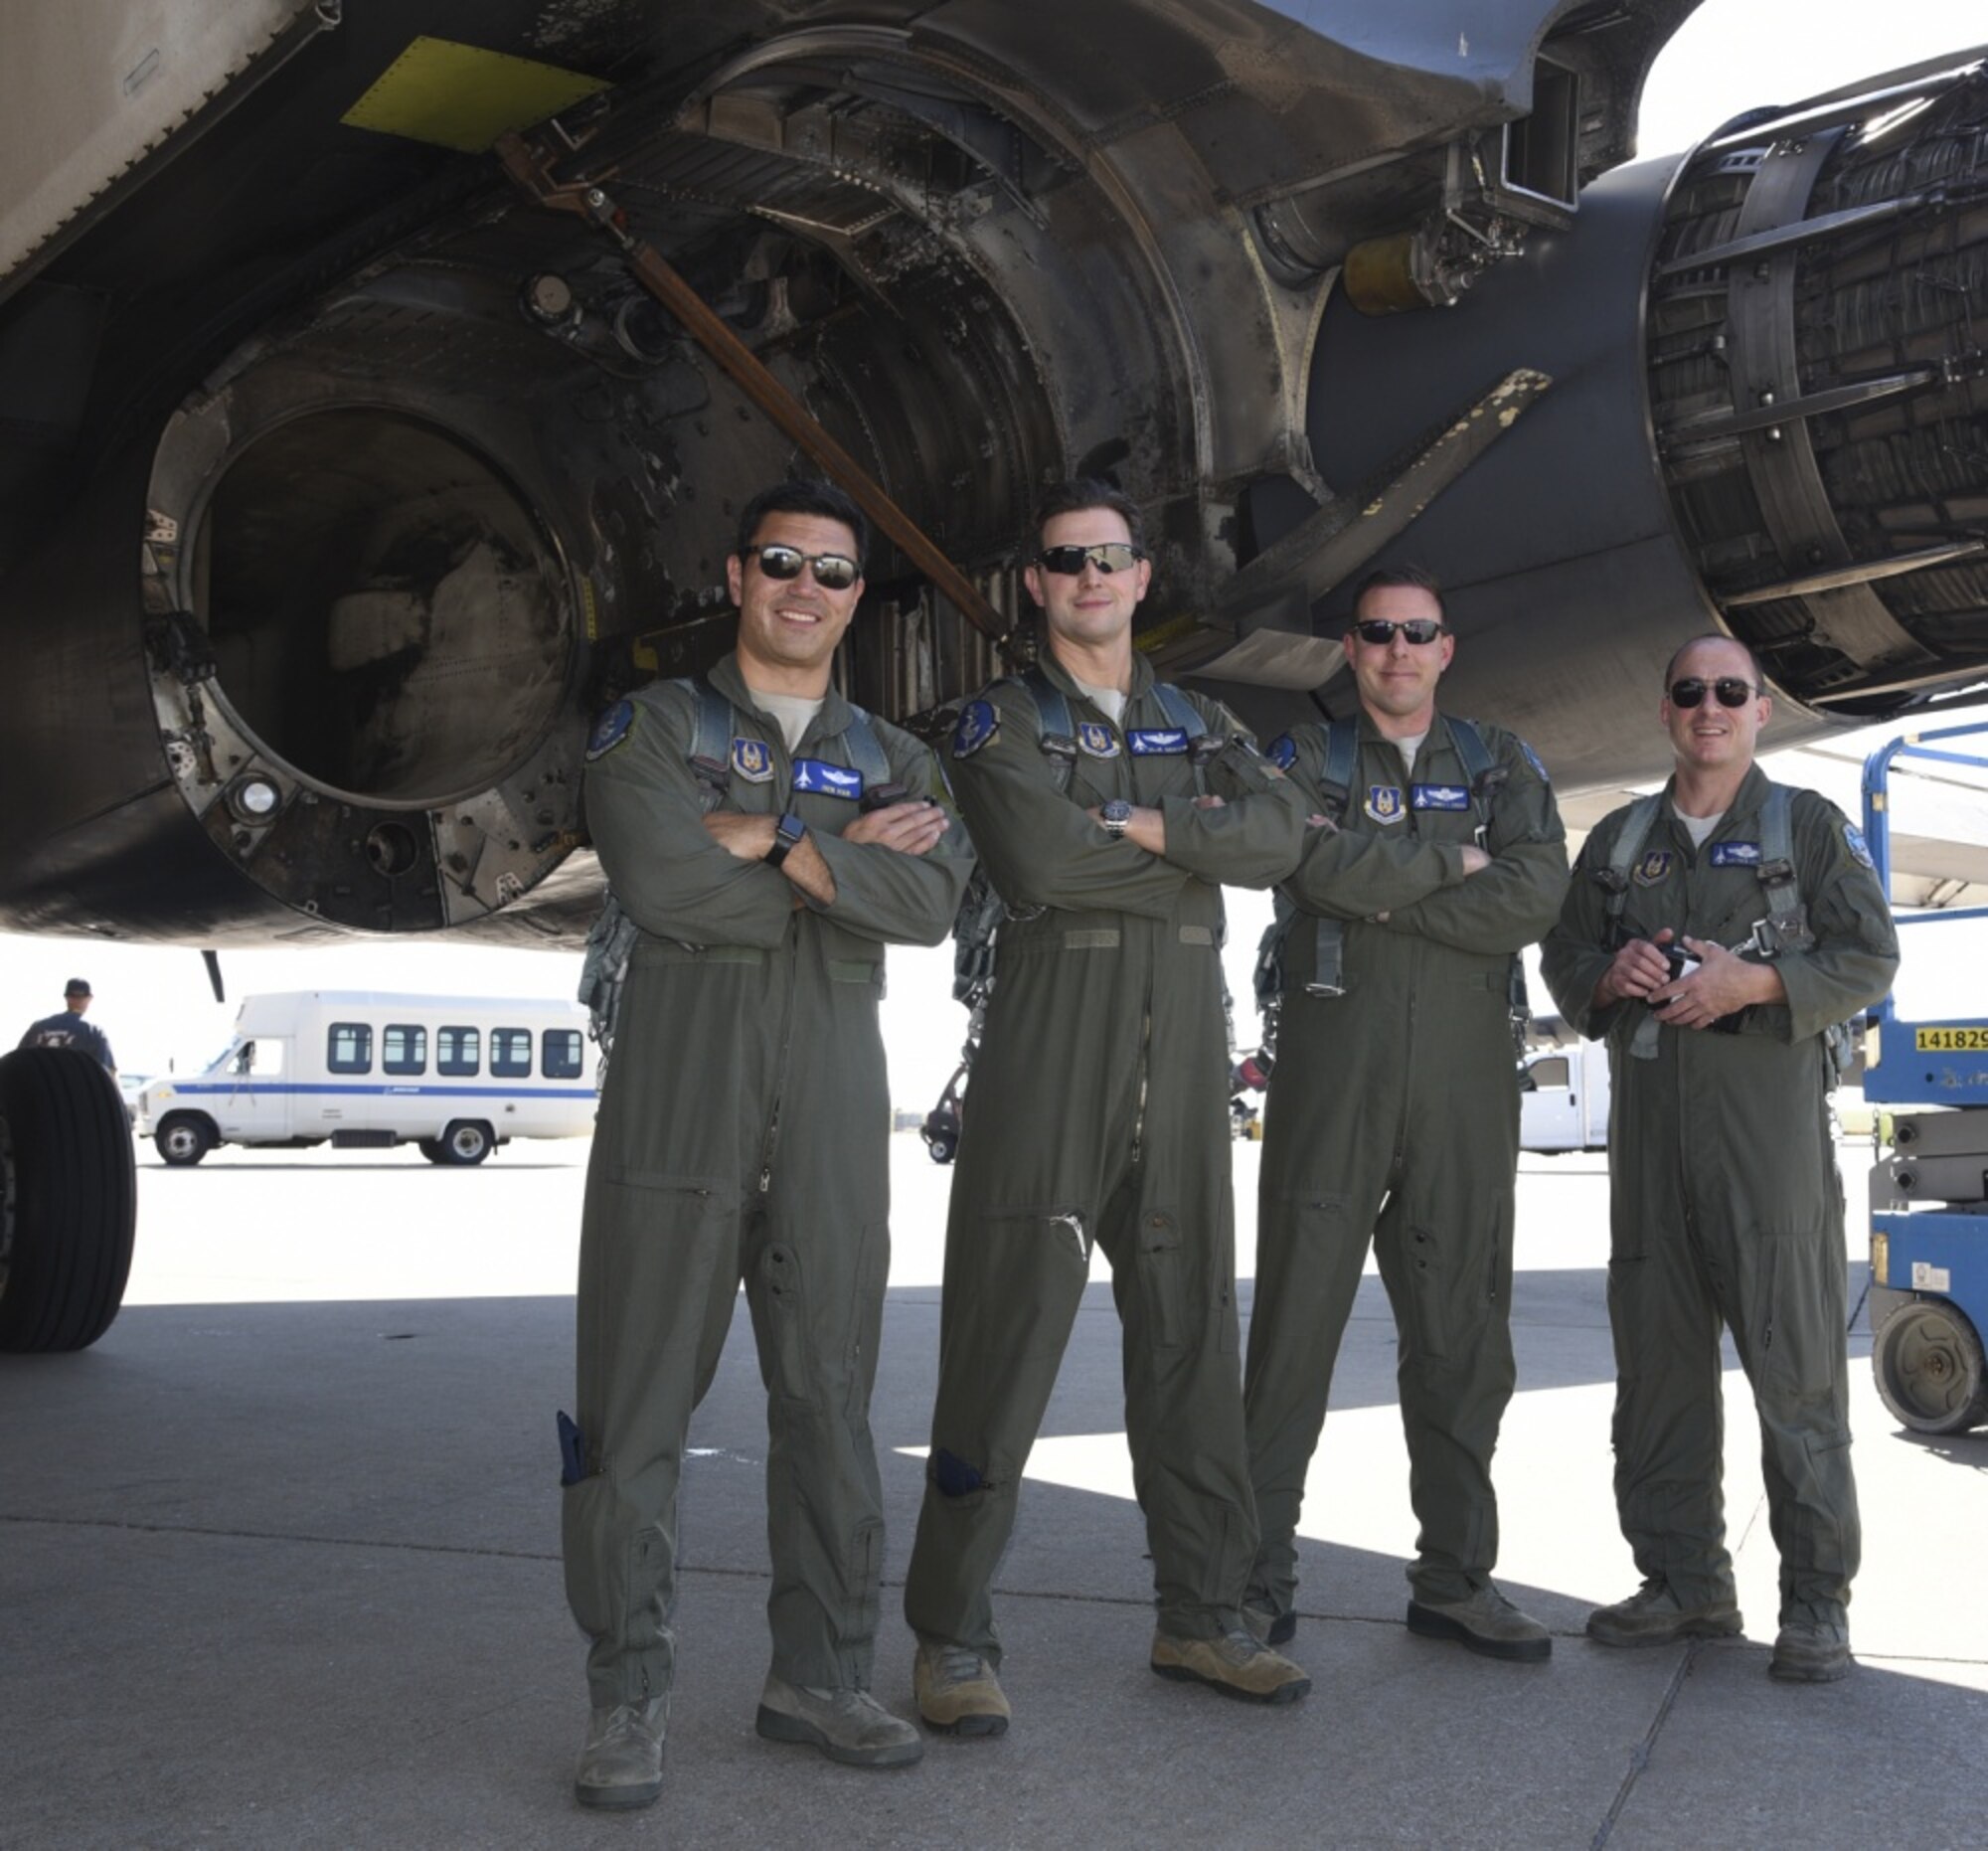 10th Flight Test Squadron flight crew for B-1B Lancer, 86-0109, pose for a group photo where the #3 engine has been removed after ferrying the aircraft from Midland International Air & Space Port to Tinker Air Force Base, Oklahoma, on Oct. 26, 2018. Shown are: Maj. Ivan Vian; pilot and aircraft commander, Maj. Michael Griffin; copilot, Lt. Col. James Couch; Offensive Weapons System Officer and Lt. Col. Matthew Grimes; Defensive Weapons System Officer. The damaged B-1B will undergo depot-level maintenance and upgrades with the Oklahoma City Air Logistics Complex. During a routine training flight May 1, the Dyess AFB based B-1B had an in-flight emergency resulting in an attempted ejection. The first crewmembers’ seat failed to deploy and the aircraft commander halted the ejection sequence and heroically saved the aircraft and crew by landing at Midland International Air & Space Port.